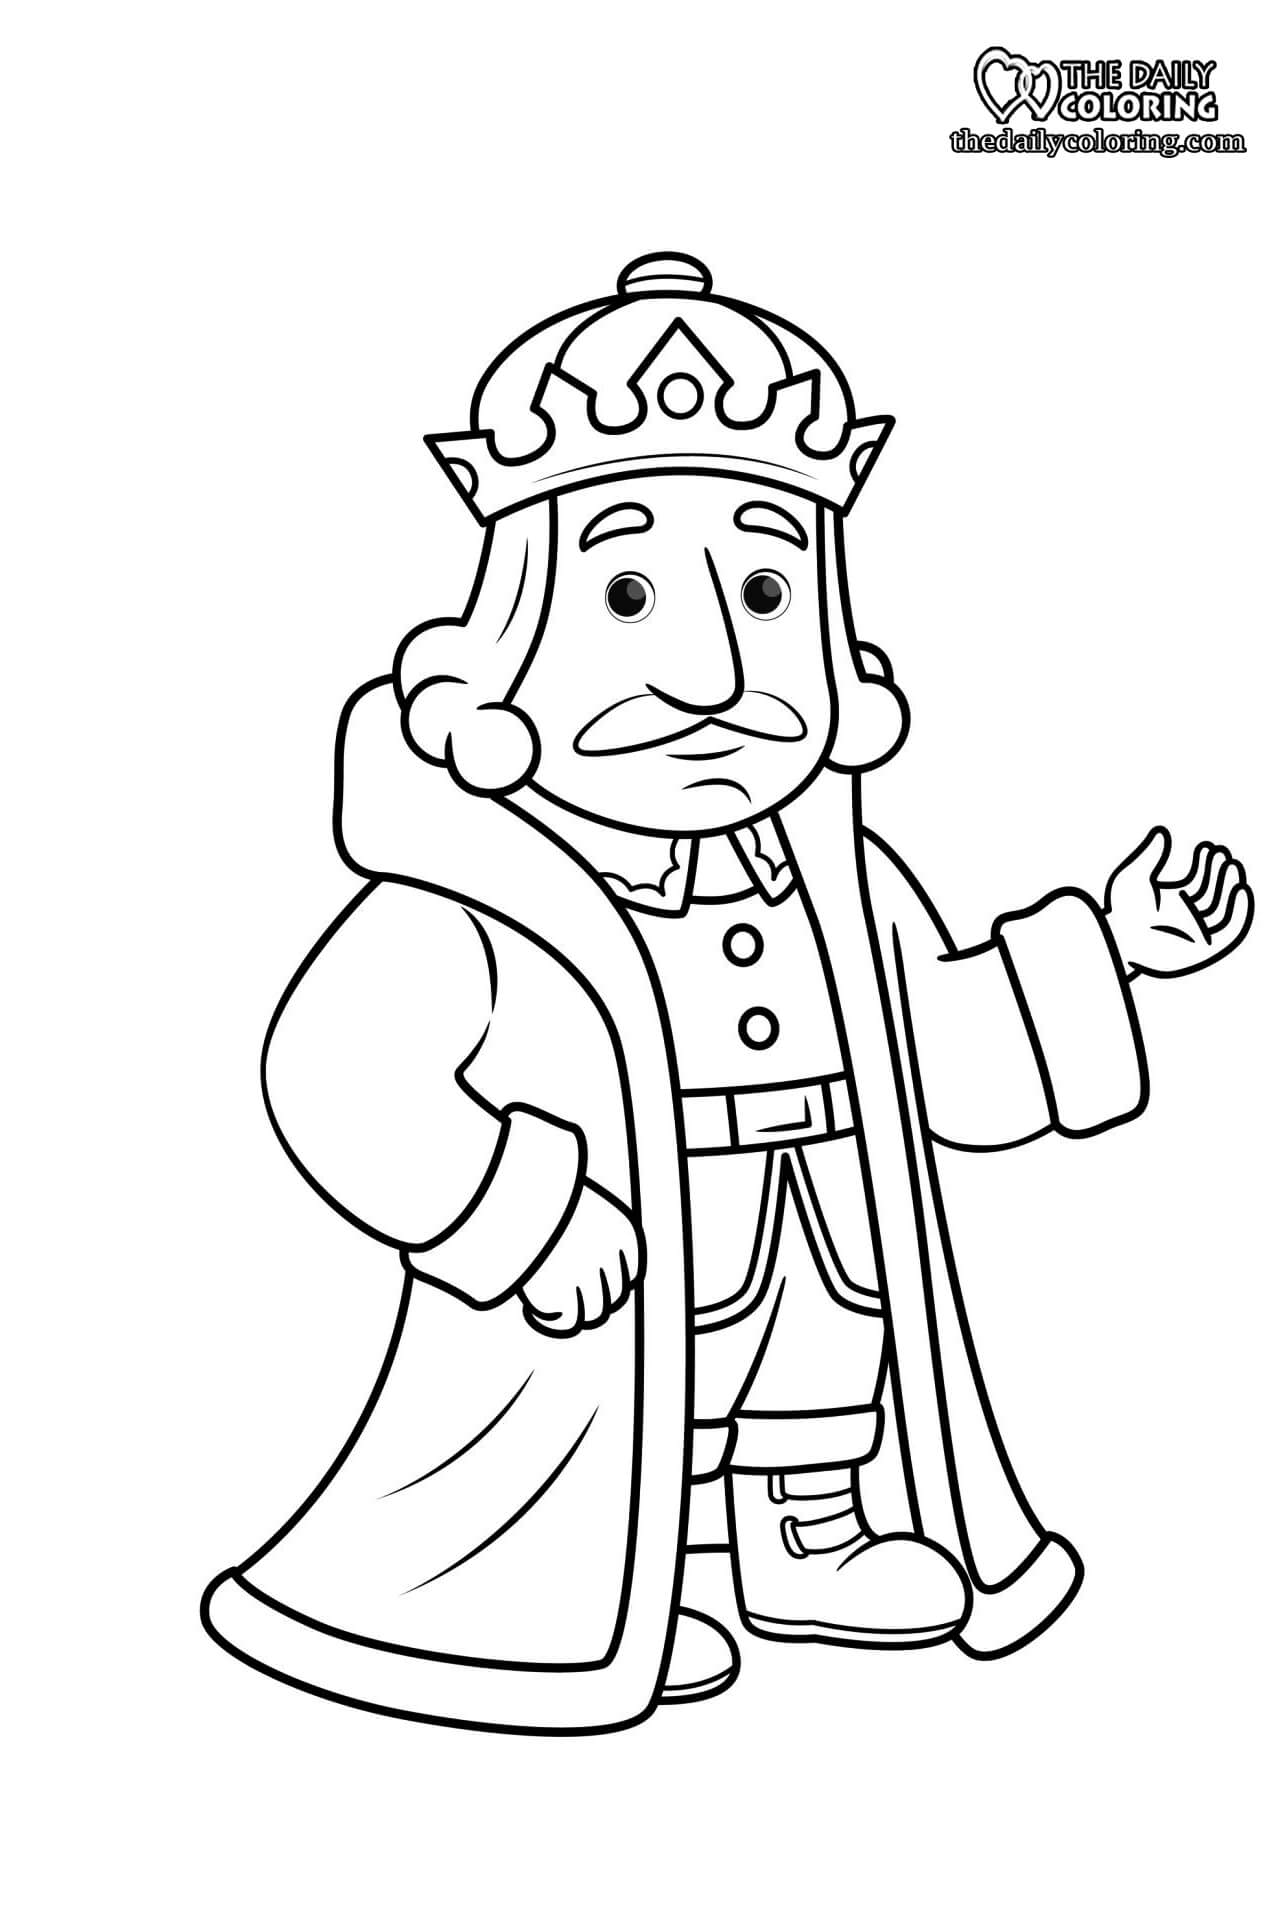 king-coloring-page